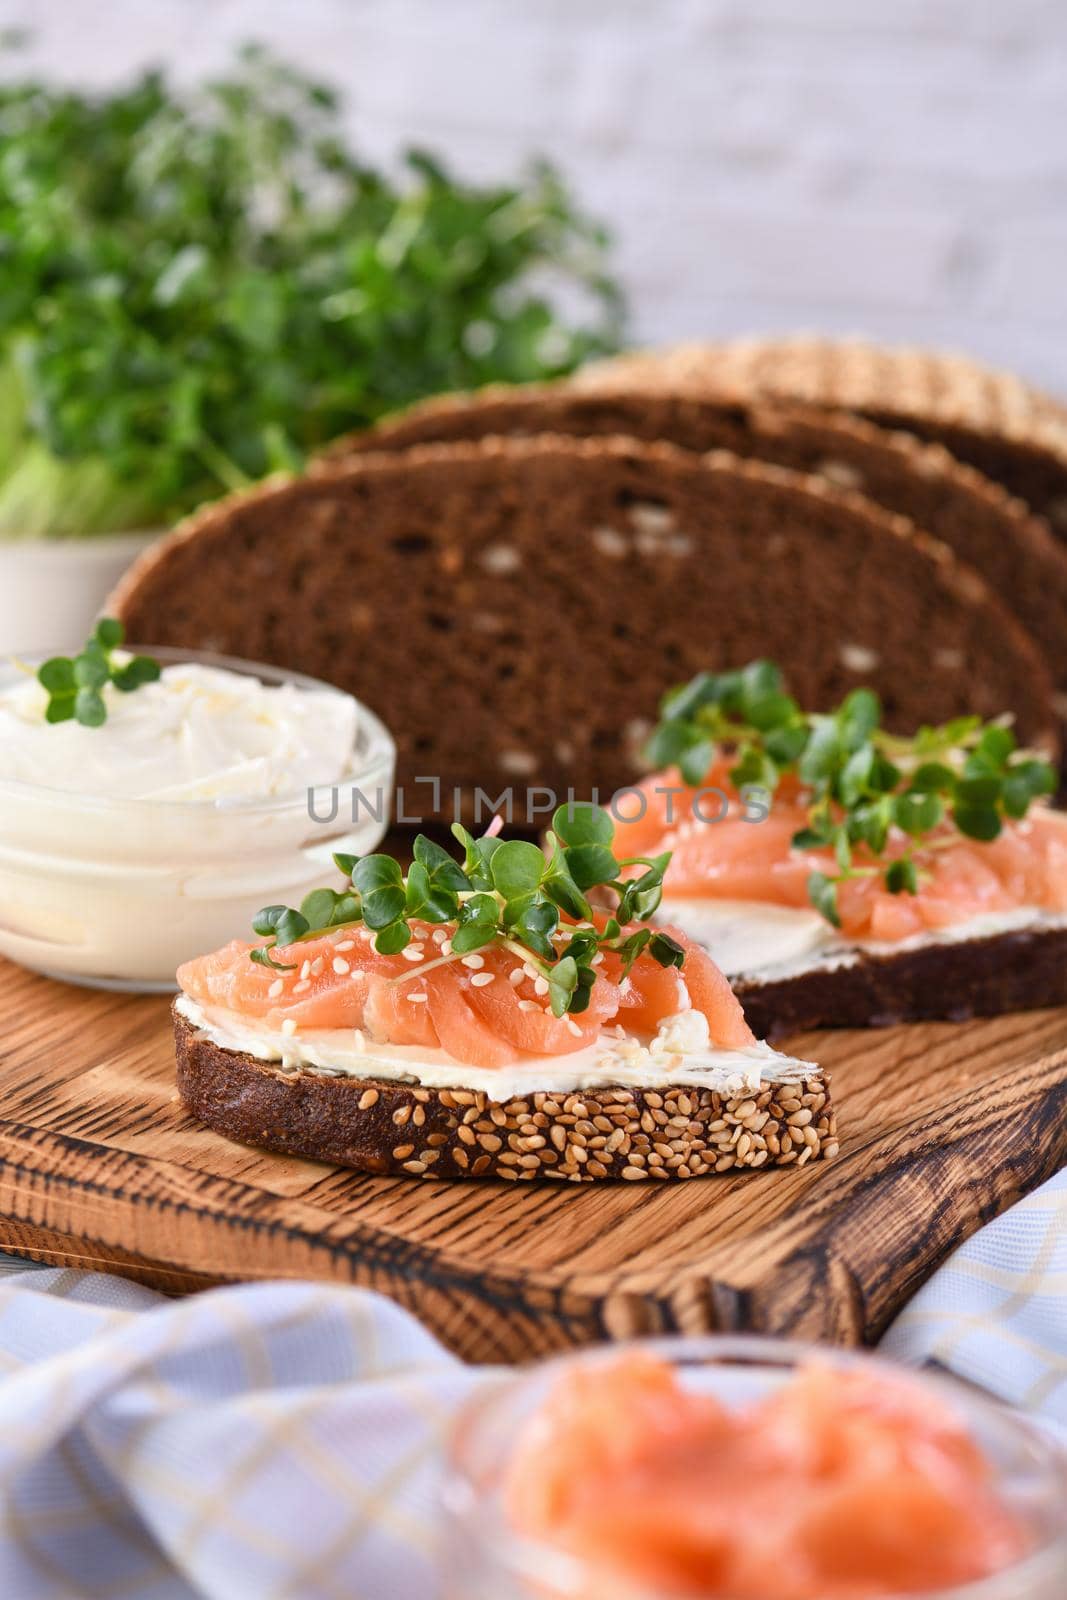 Open sandwich with cheese cream on a slice of rye bread with cereals, slices of marinated salmon, and radish sprouts.